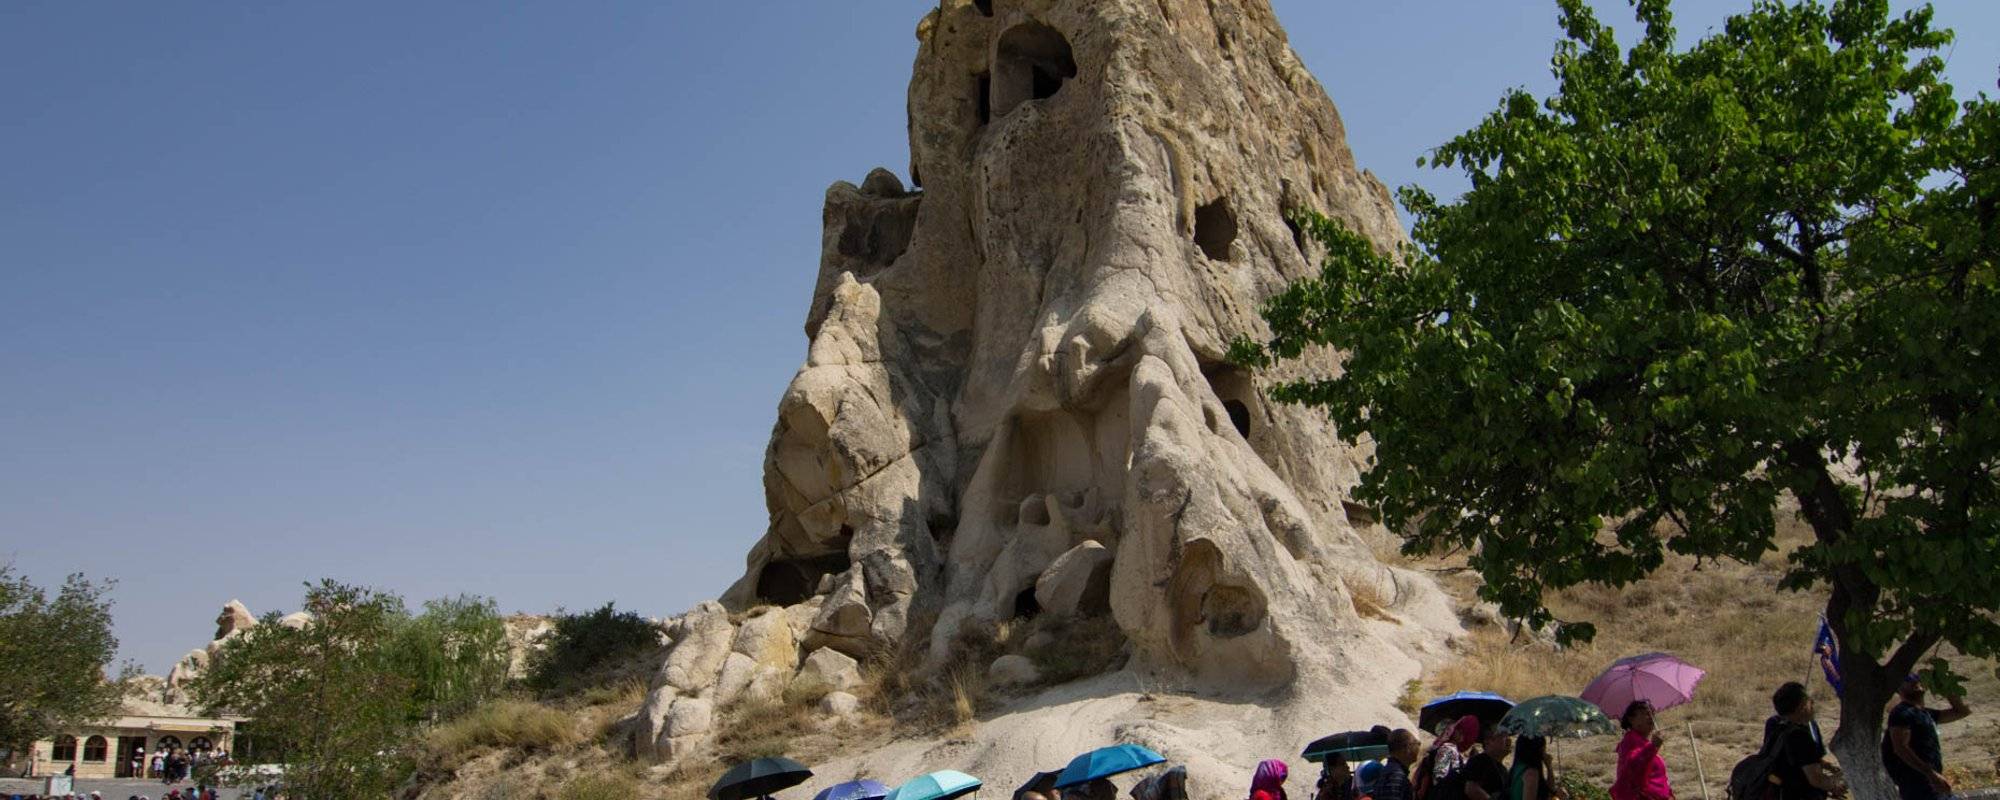 Goreme Open Air Museum (Göreme, Turkey). Unusual views and cool photo location